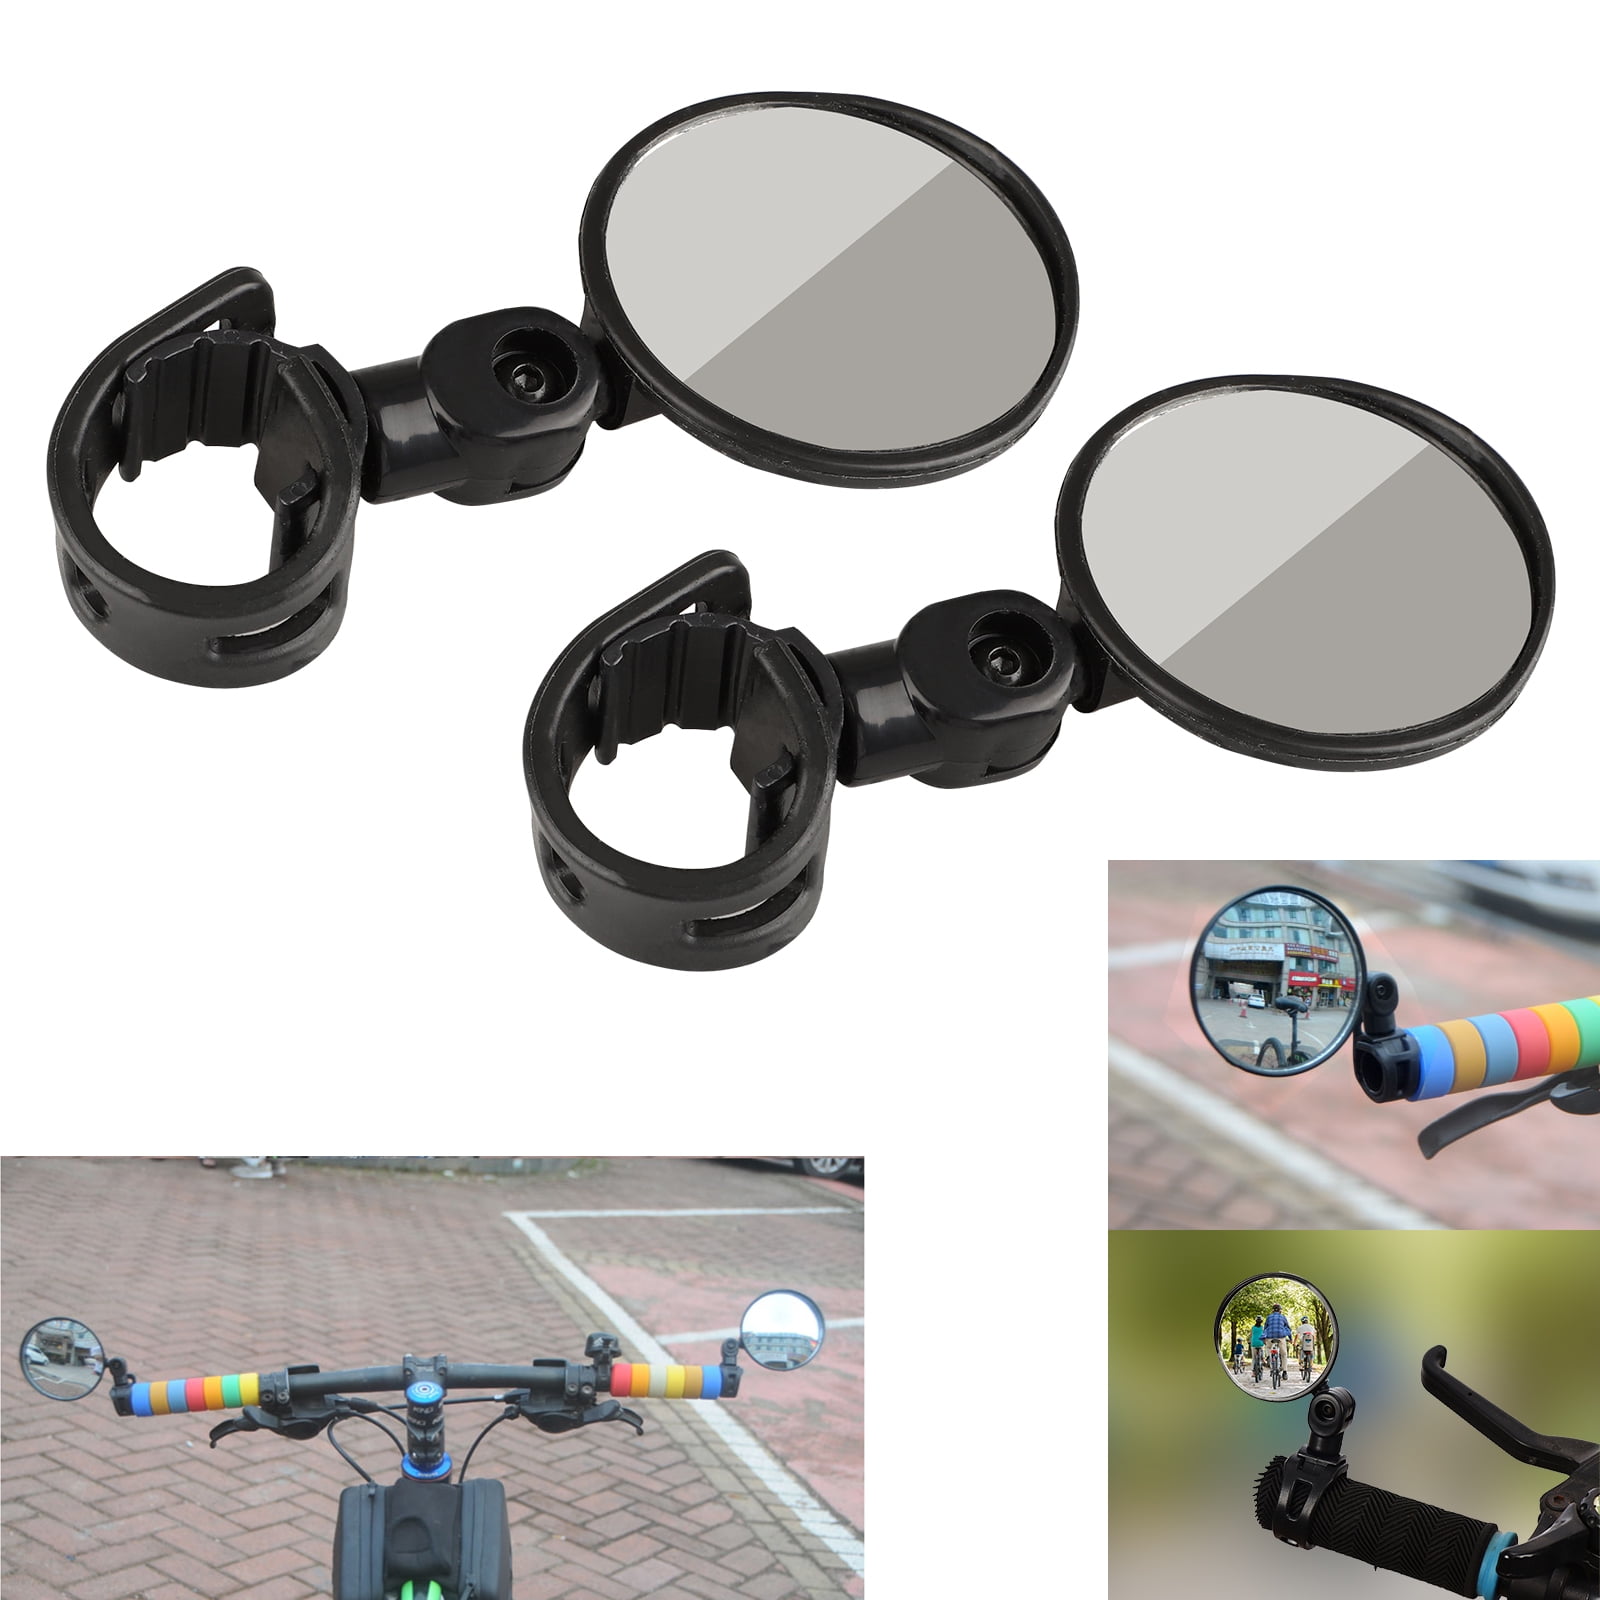 Details about   Bell SMARTVIEW 300 WIDE ANGLE MIRROR  BIKE BICYCLE BRAND NEW